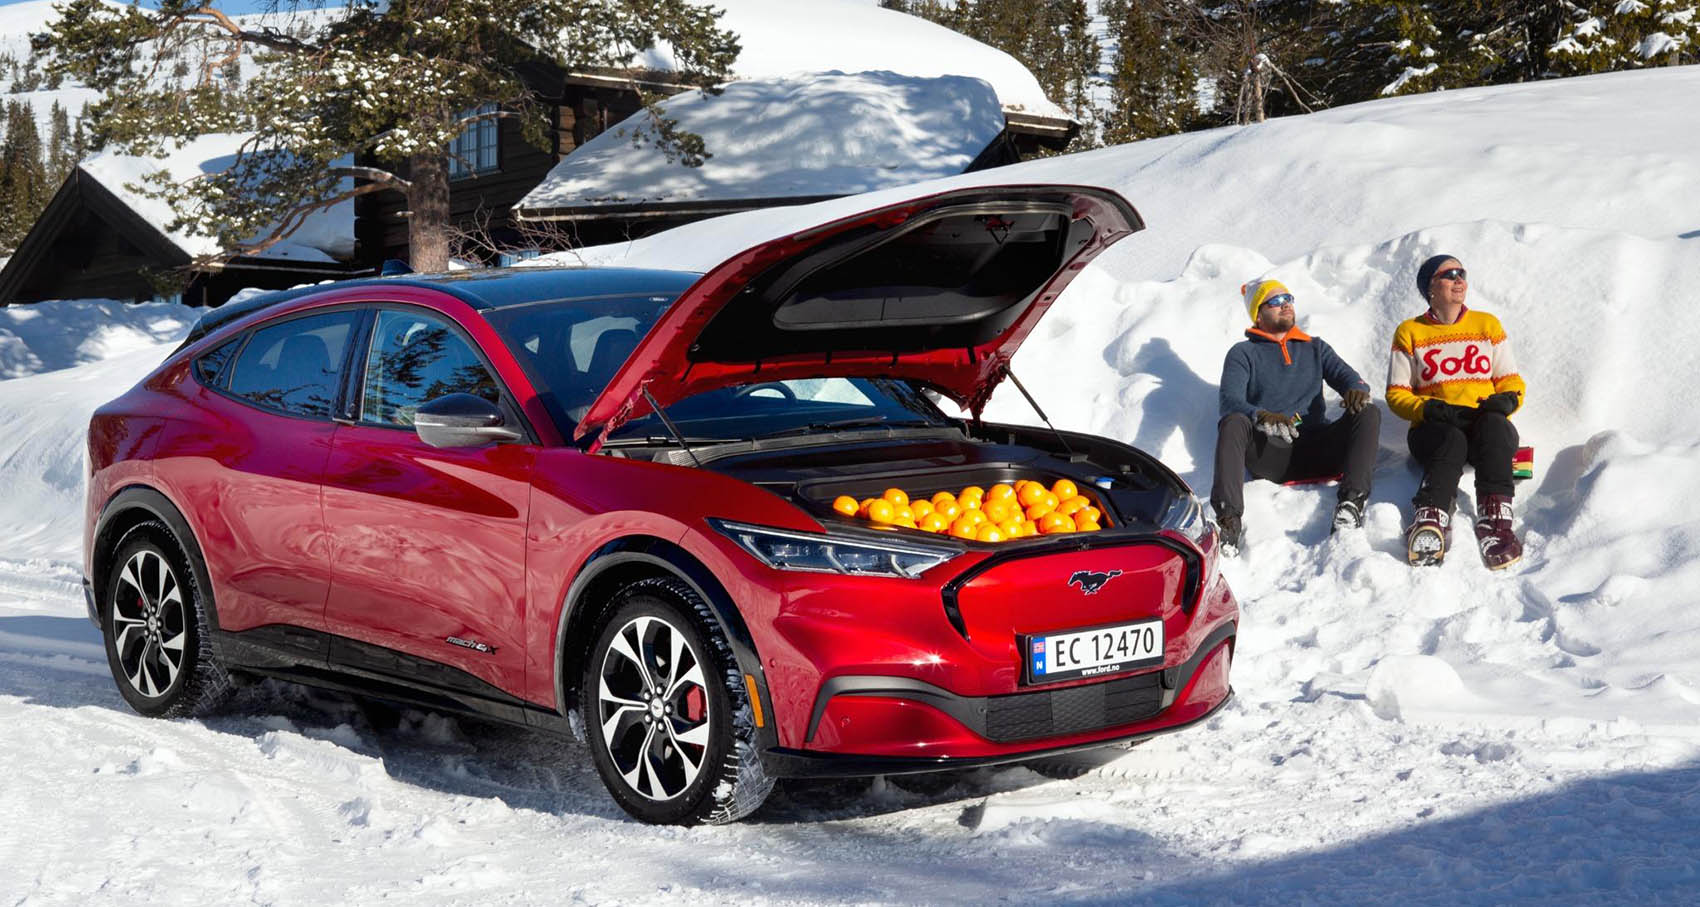 Norway continues to lead in electric vehicle sales